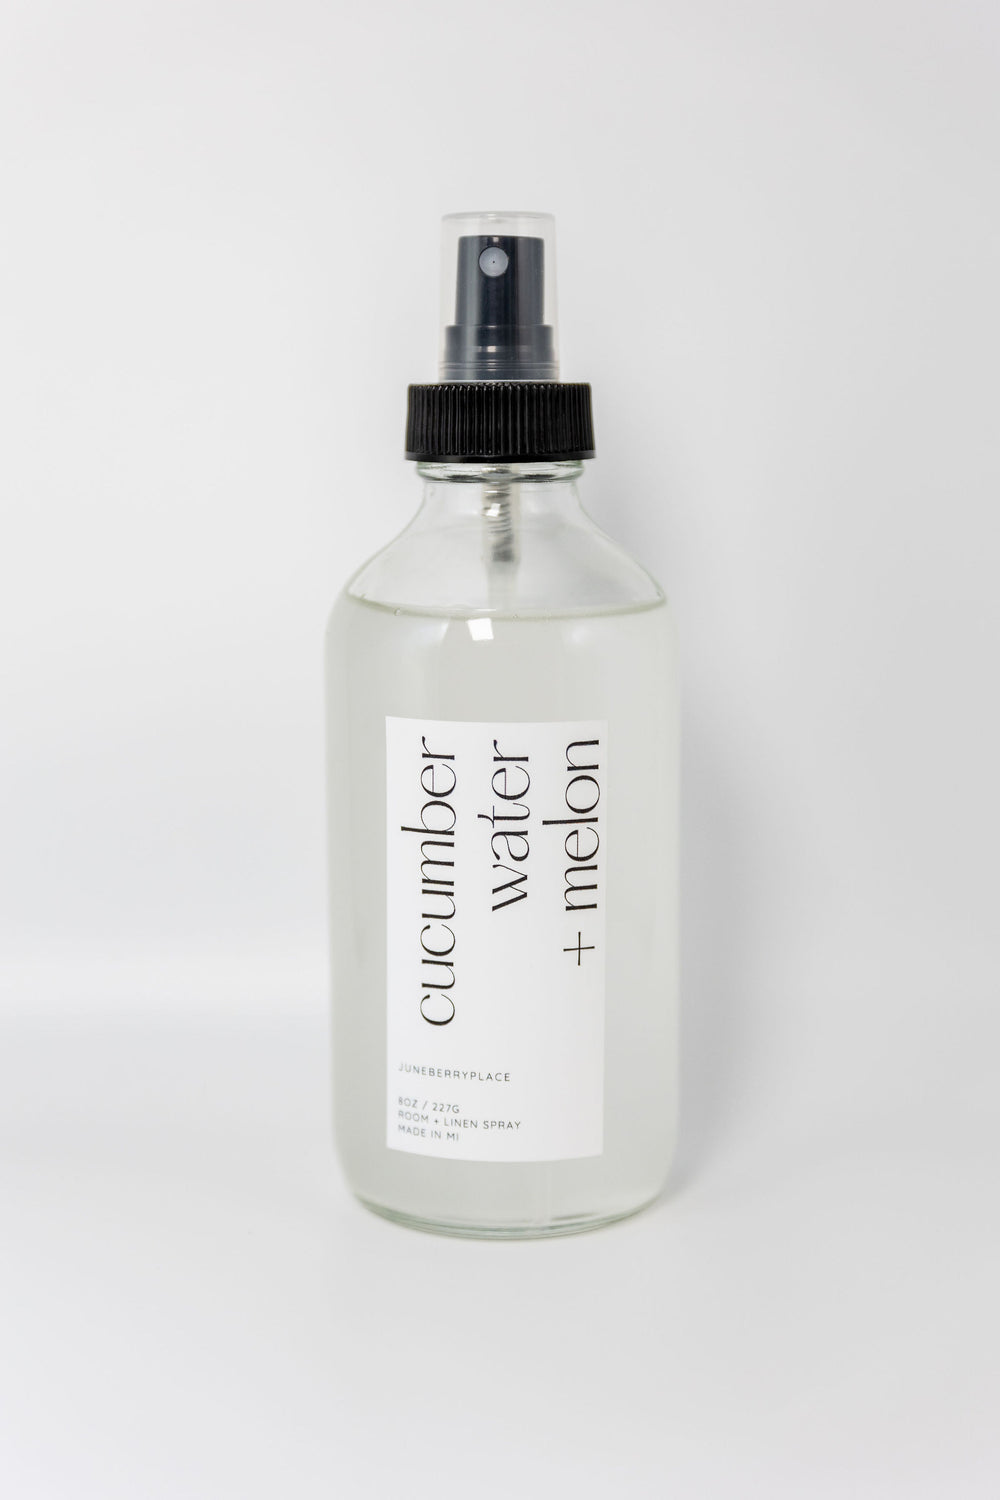 Cucumber Water and Melon Room + Linen Spray - Spring Collection in a glass bottle by juneberryplace home fragrances